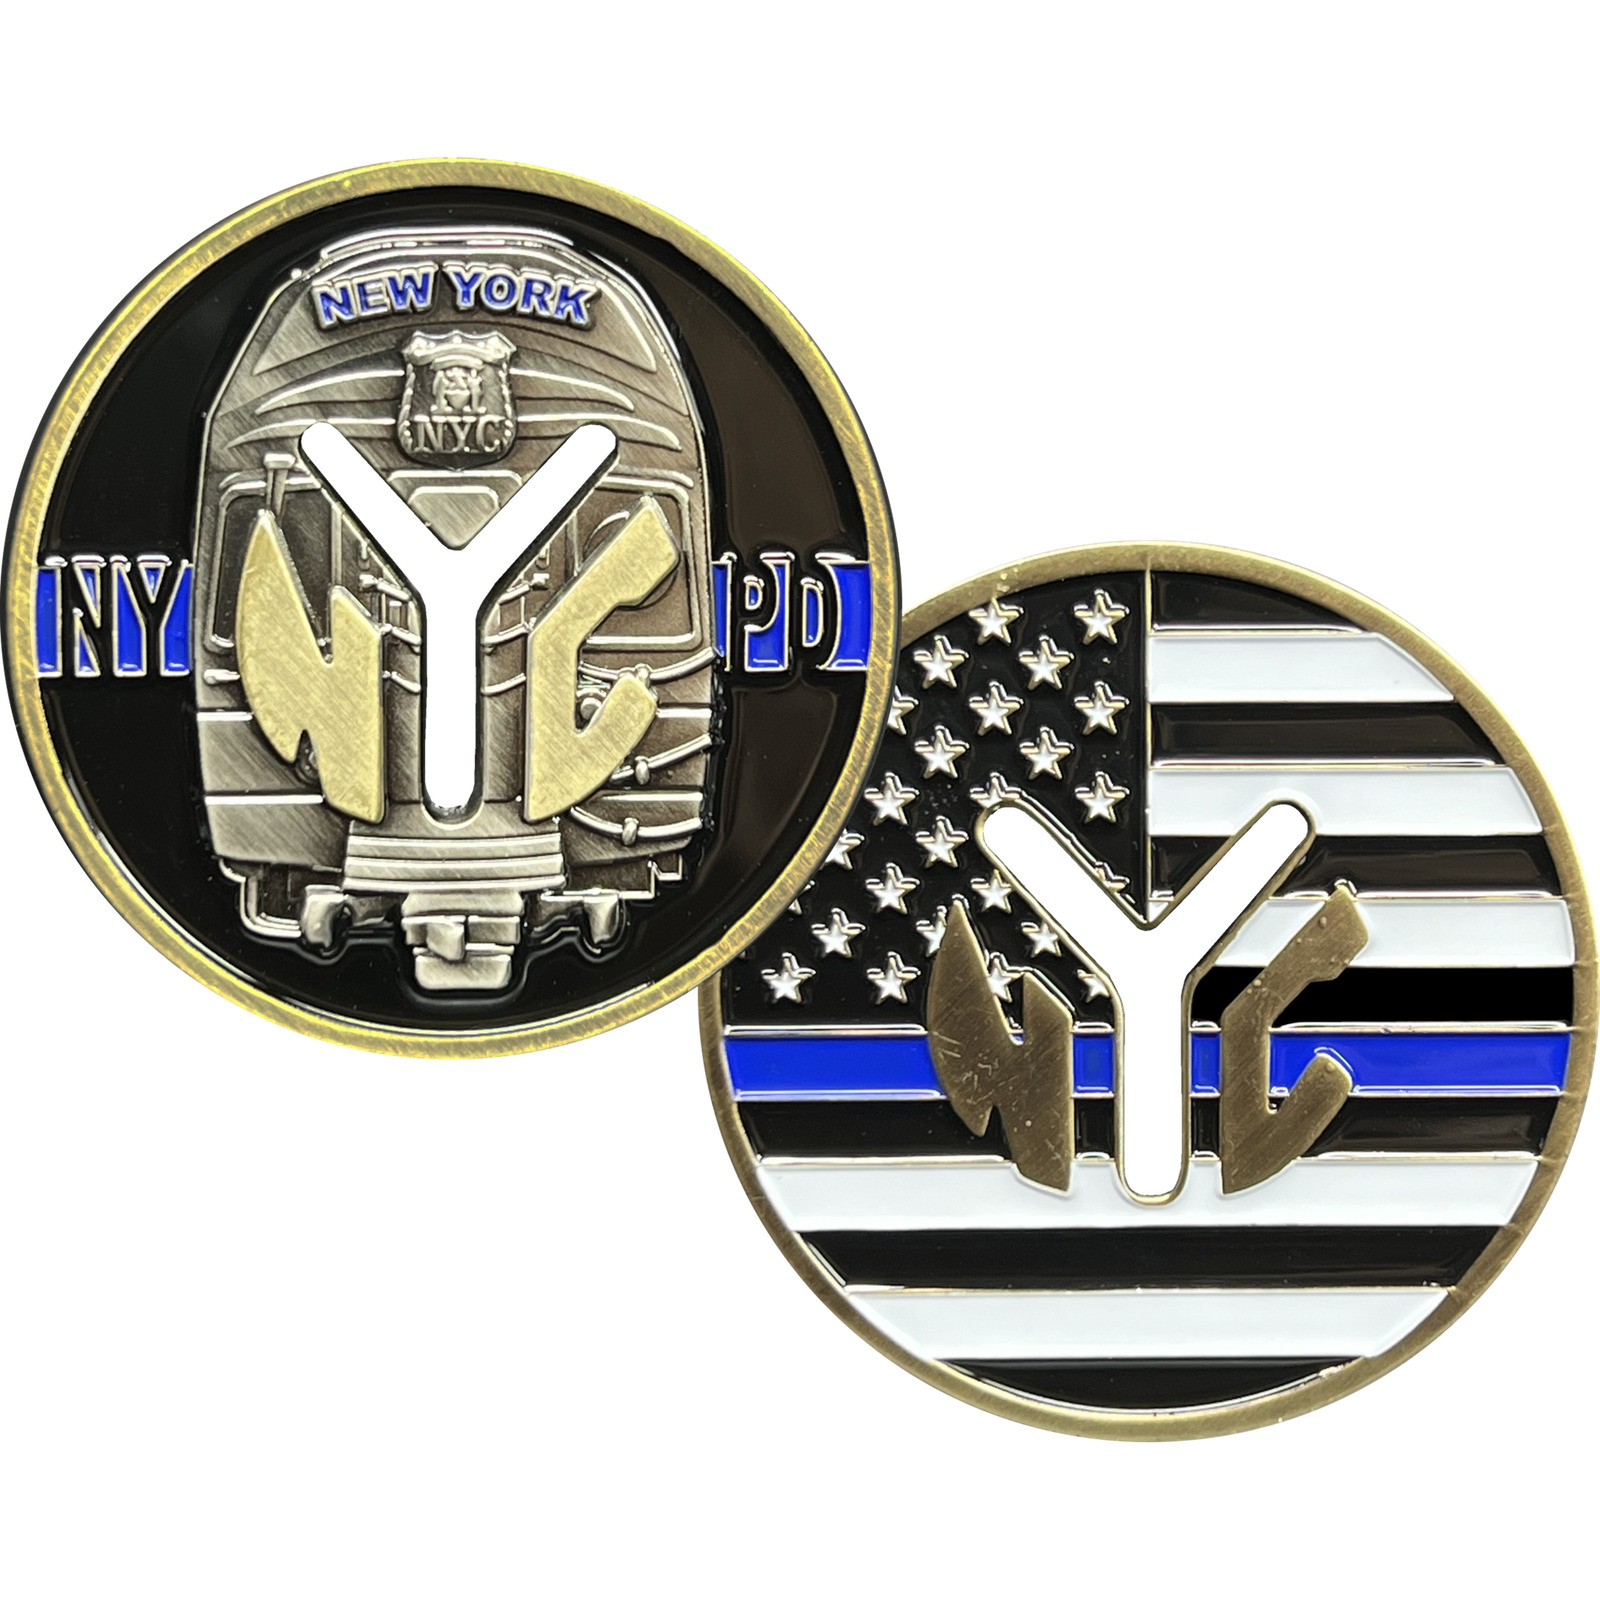 New York City Transit Police Department Thin Blue Line Challenge Coin GL1-001